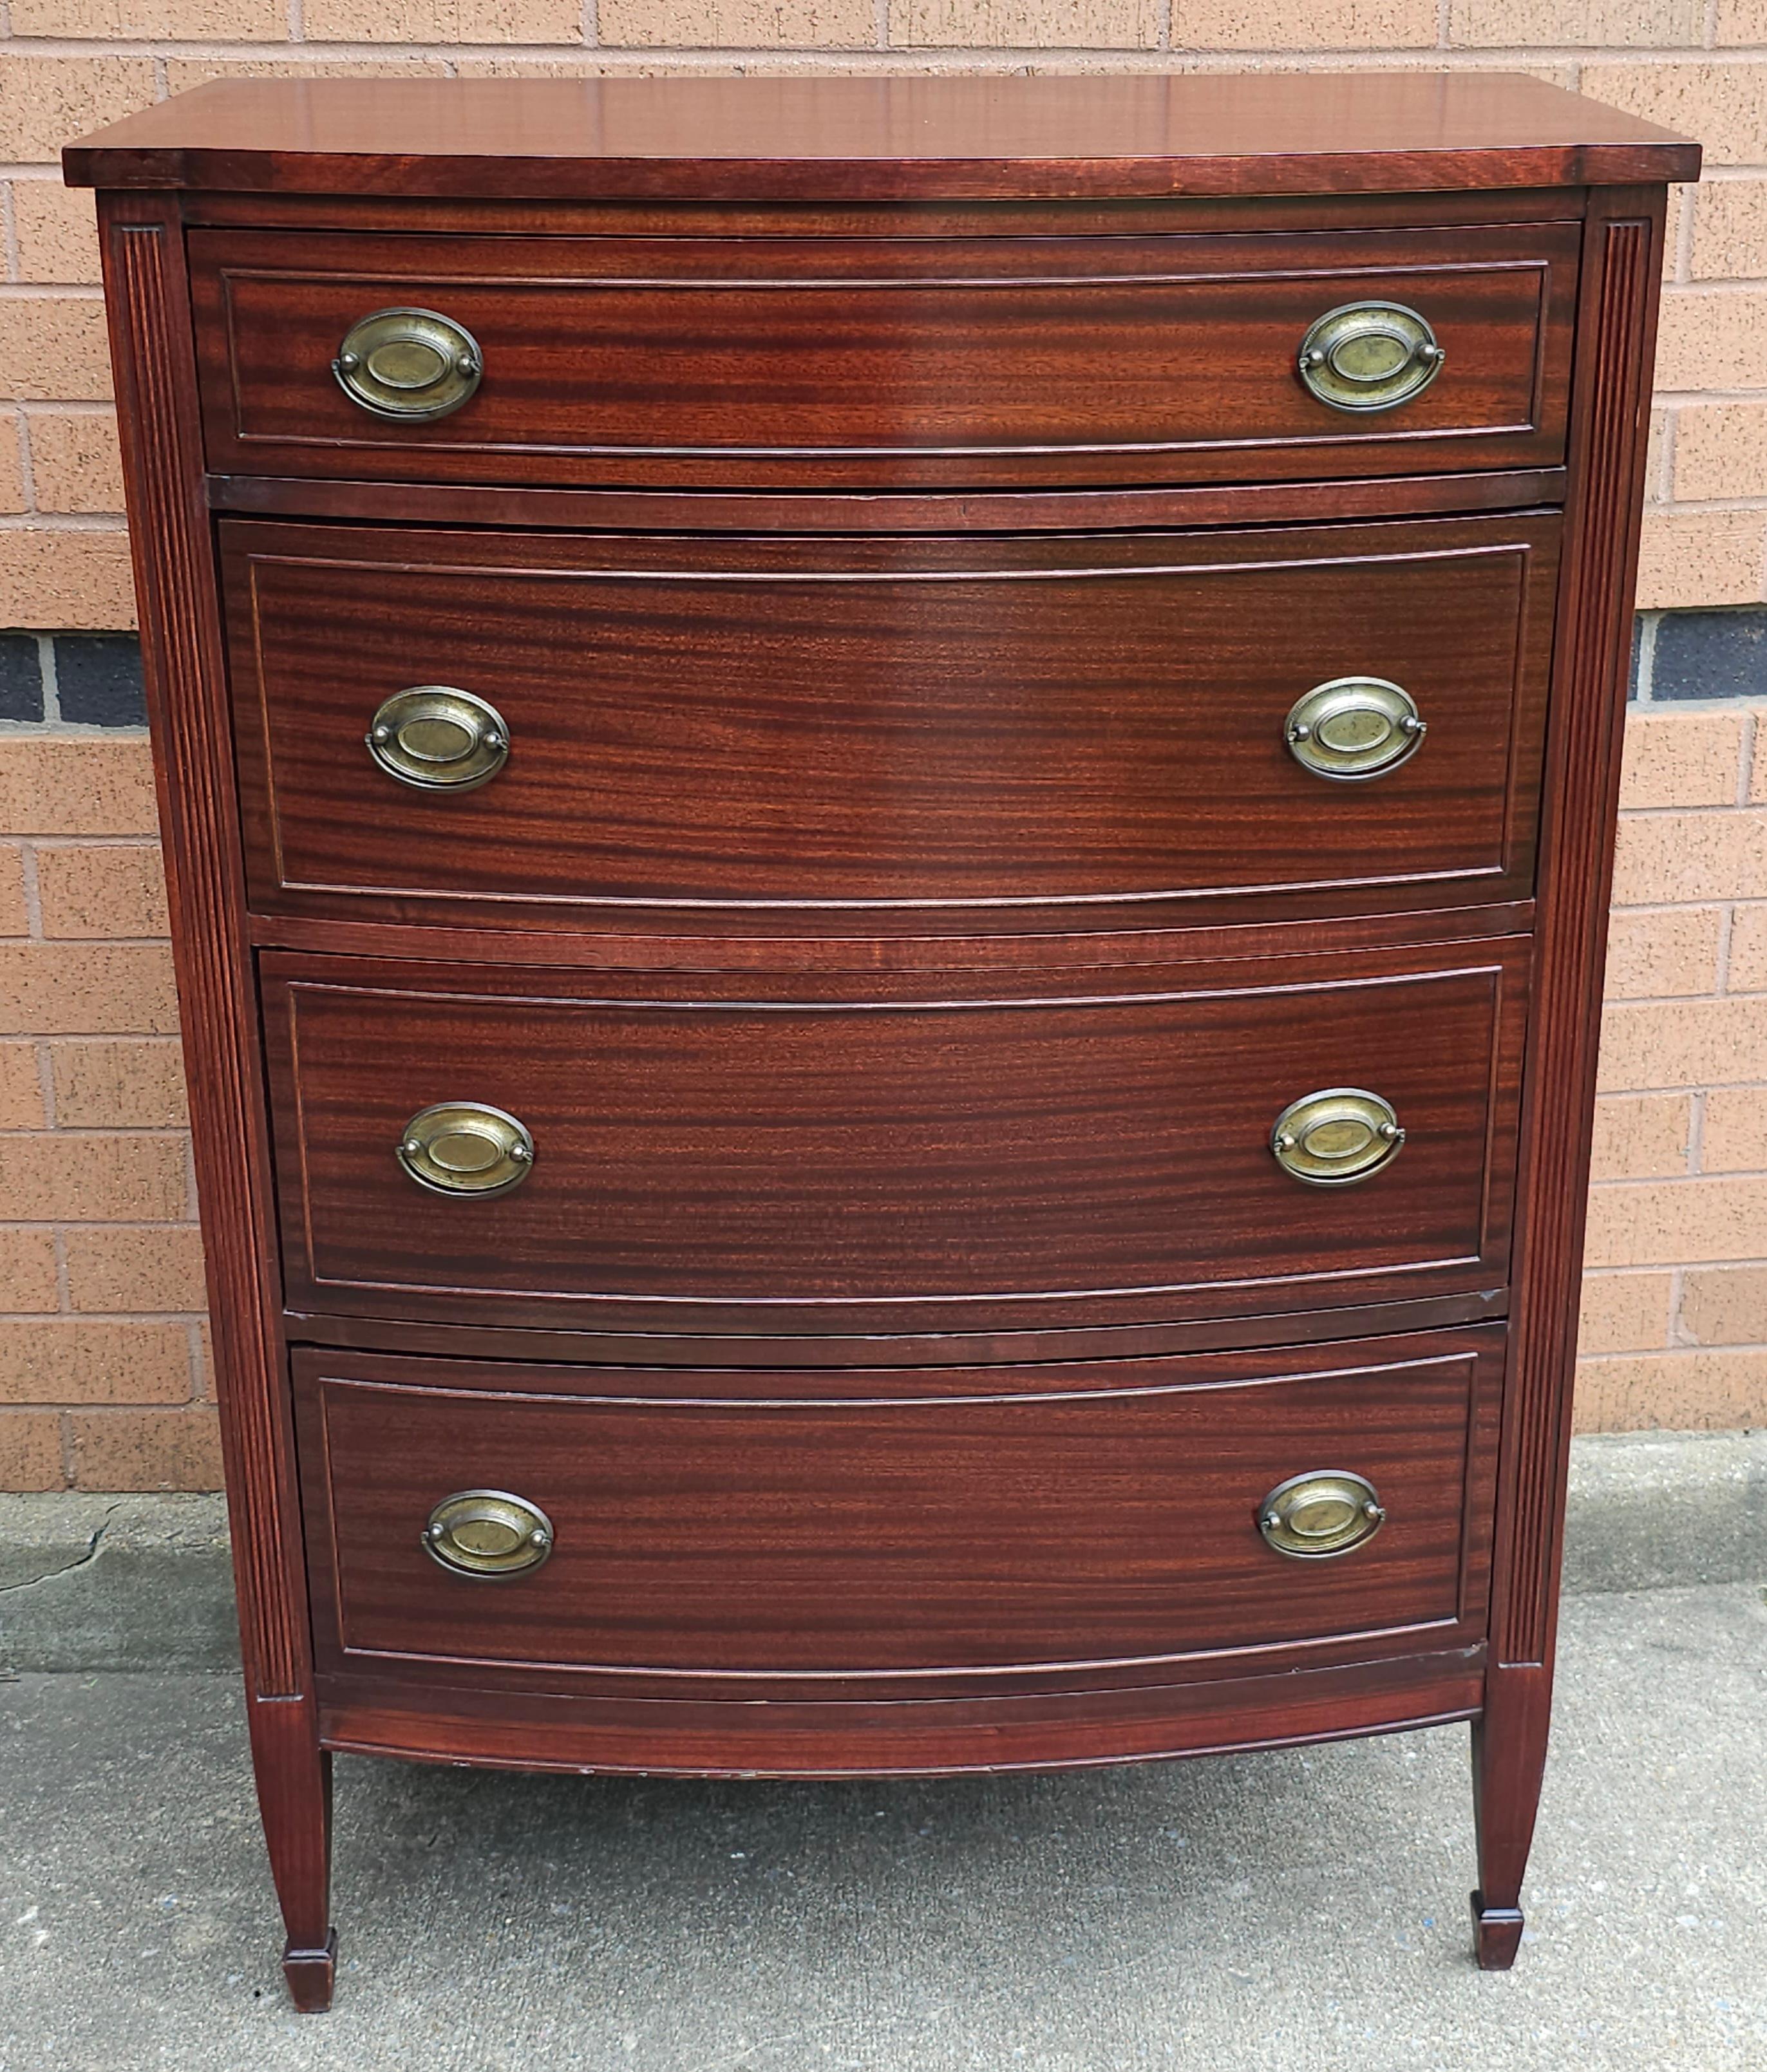 A Mid 20th Century Federal Hepplewhite Style Mahogany Chest of Drawers. Recently refibished and in Great vintage condition.
Measures 34.25